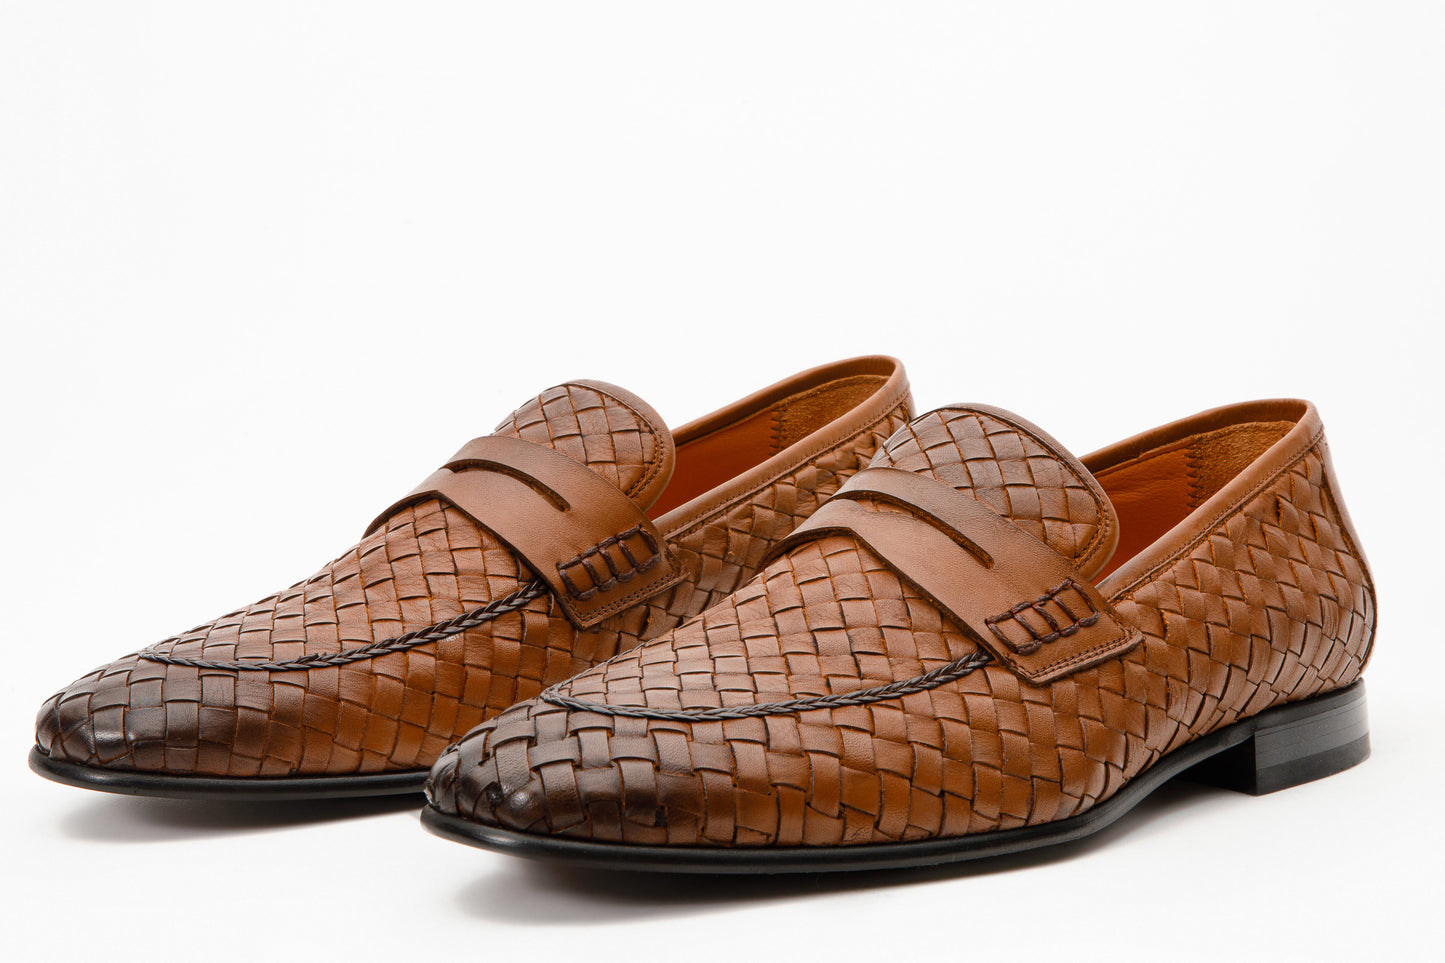 The Grand Woven Leather Tan Men Shoe Penny Loafer